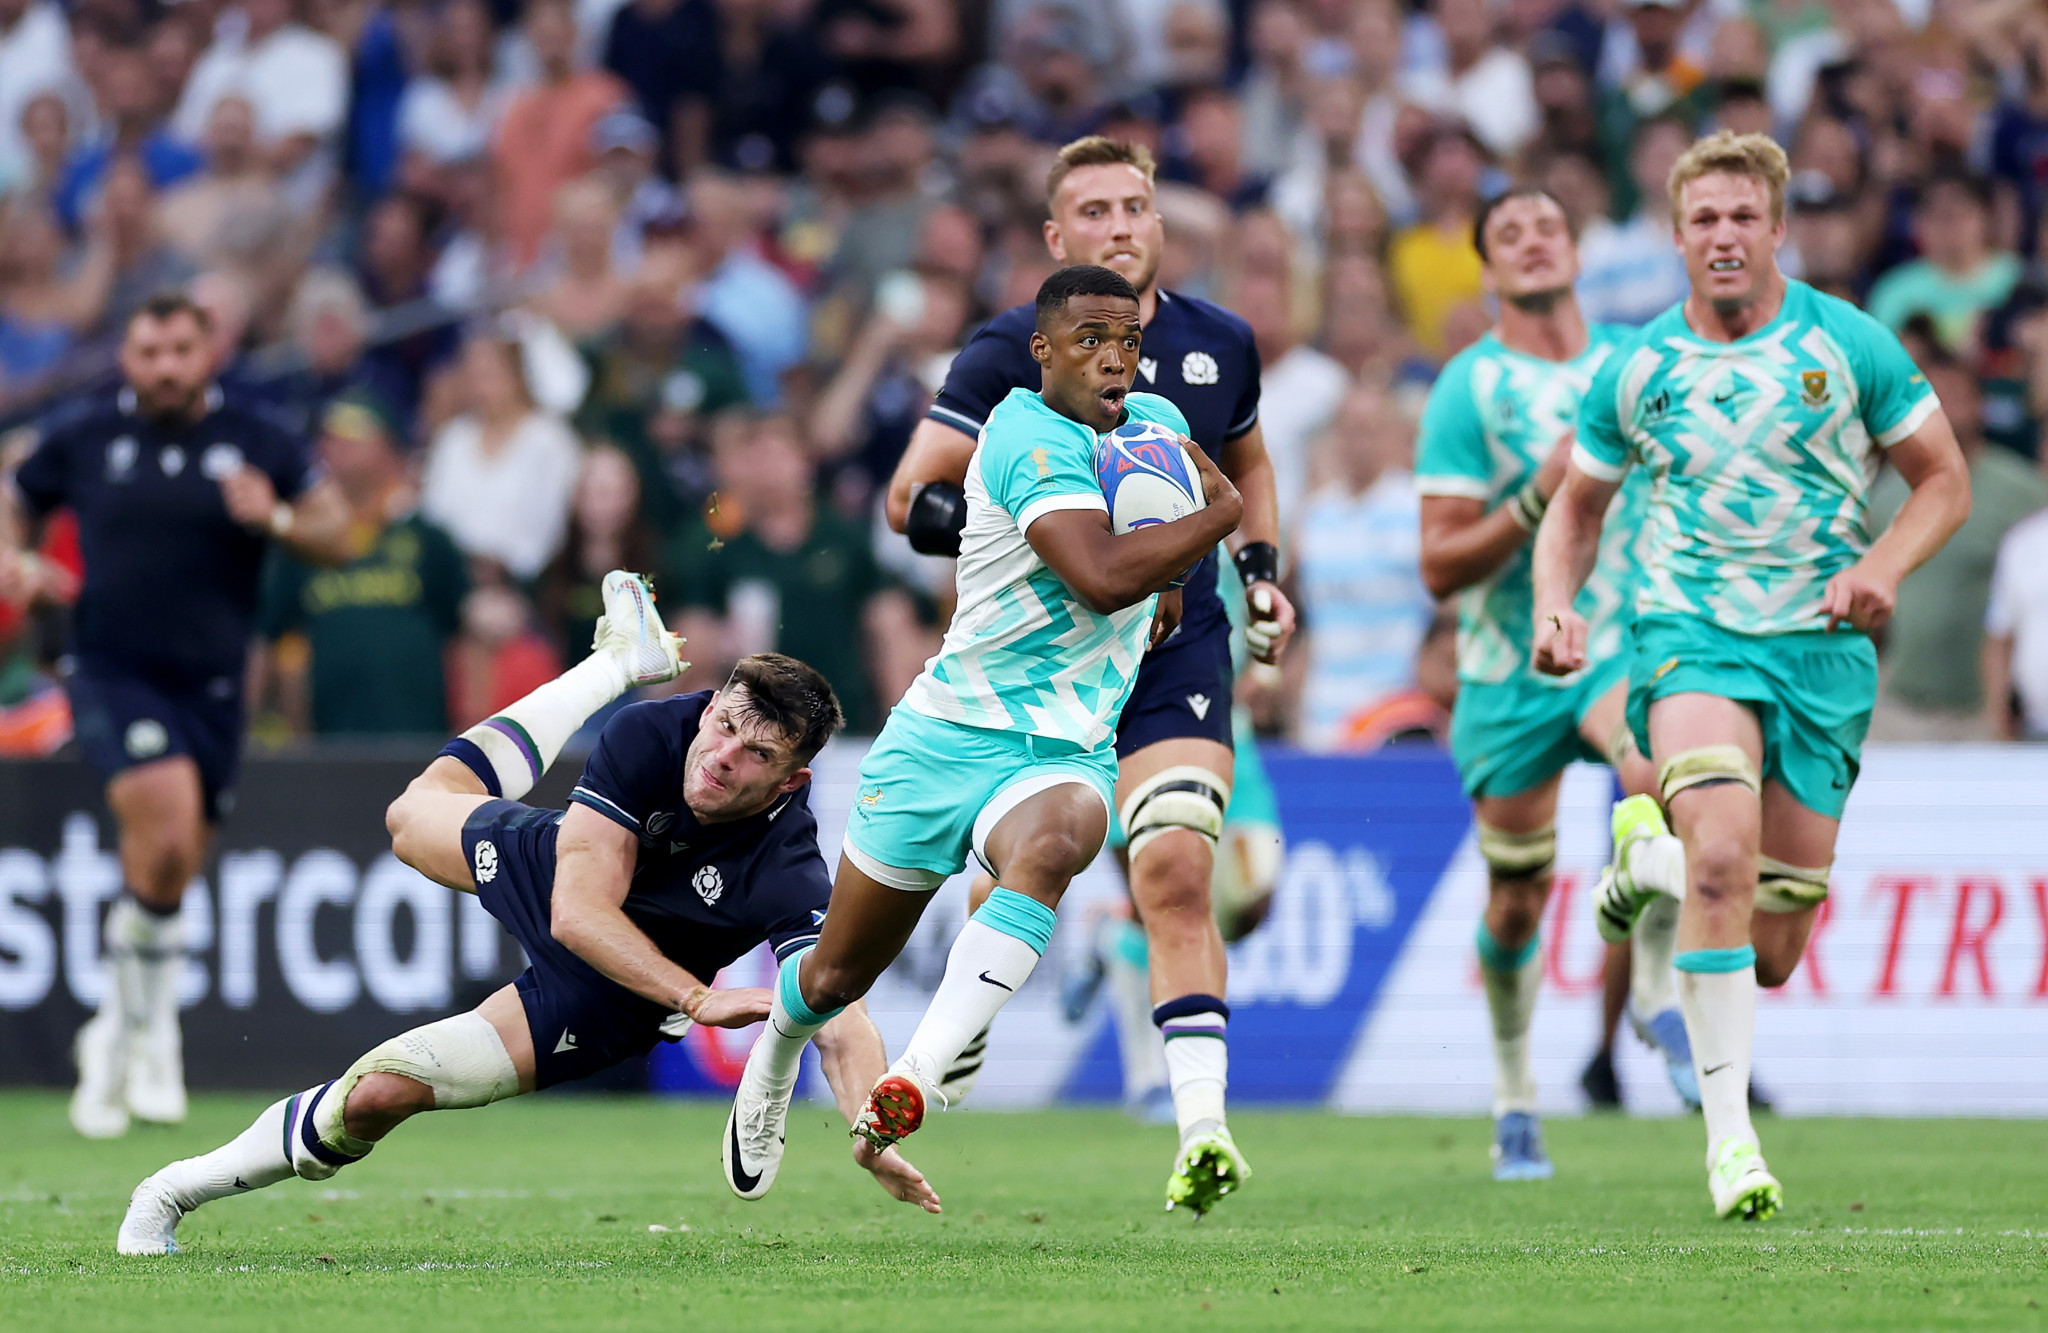 South Africa proved too strong for Scotland in the second half in Marseille ©Getty Images